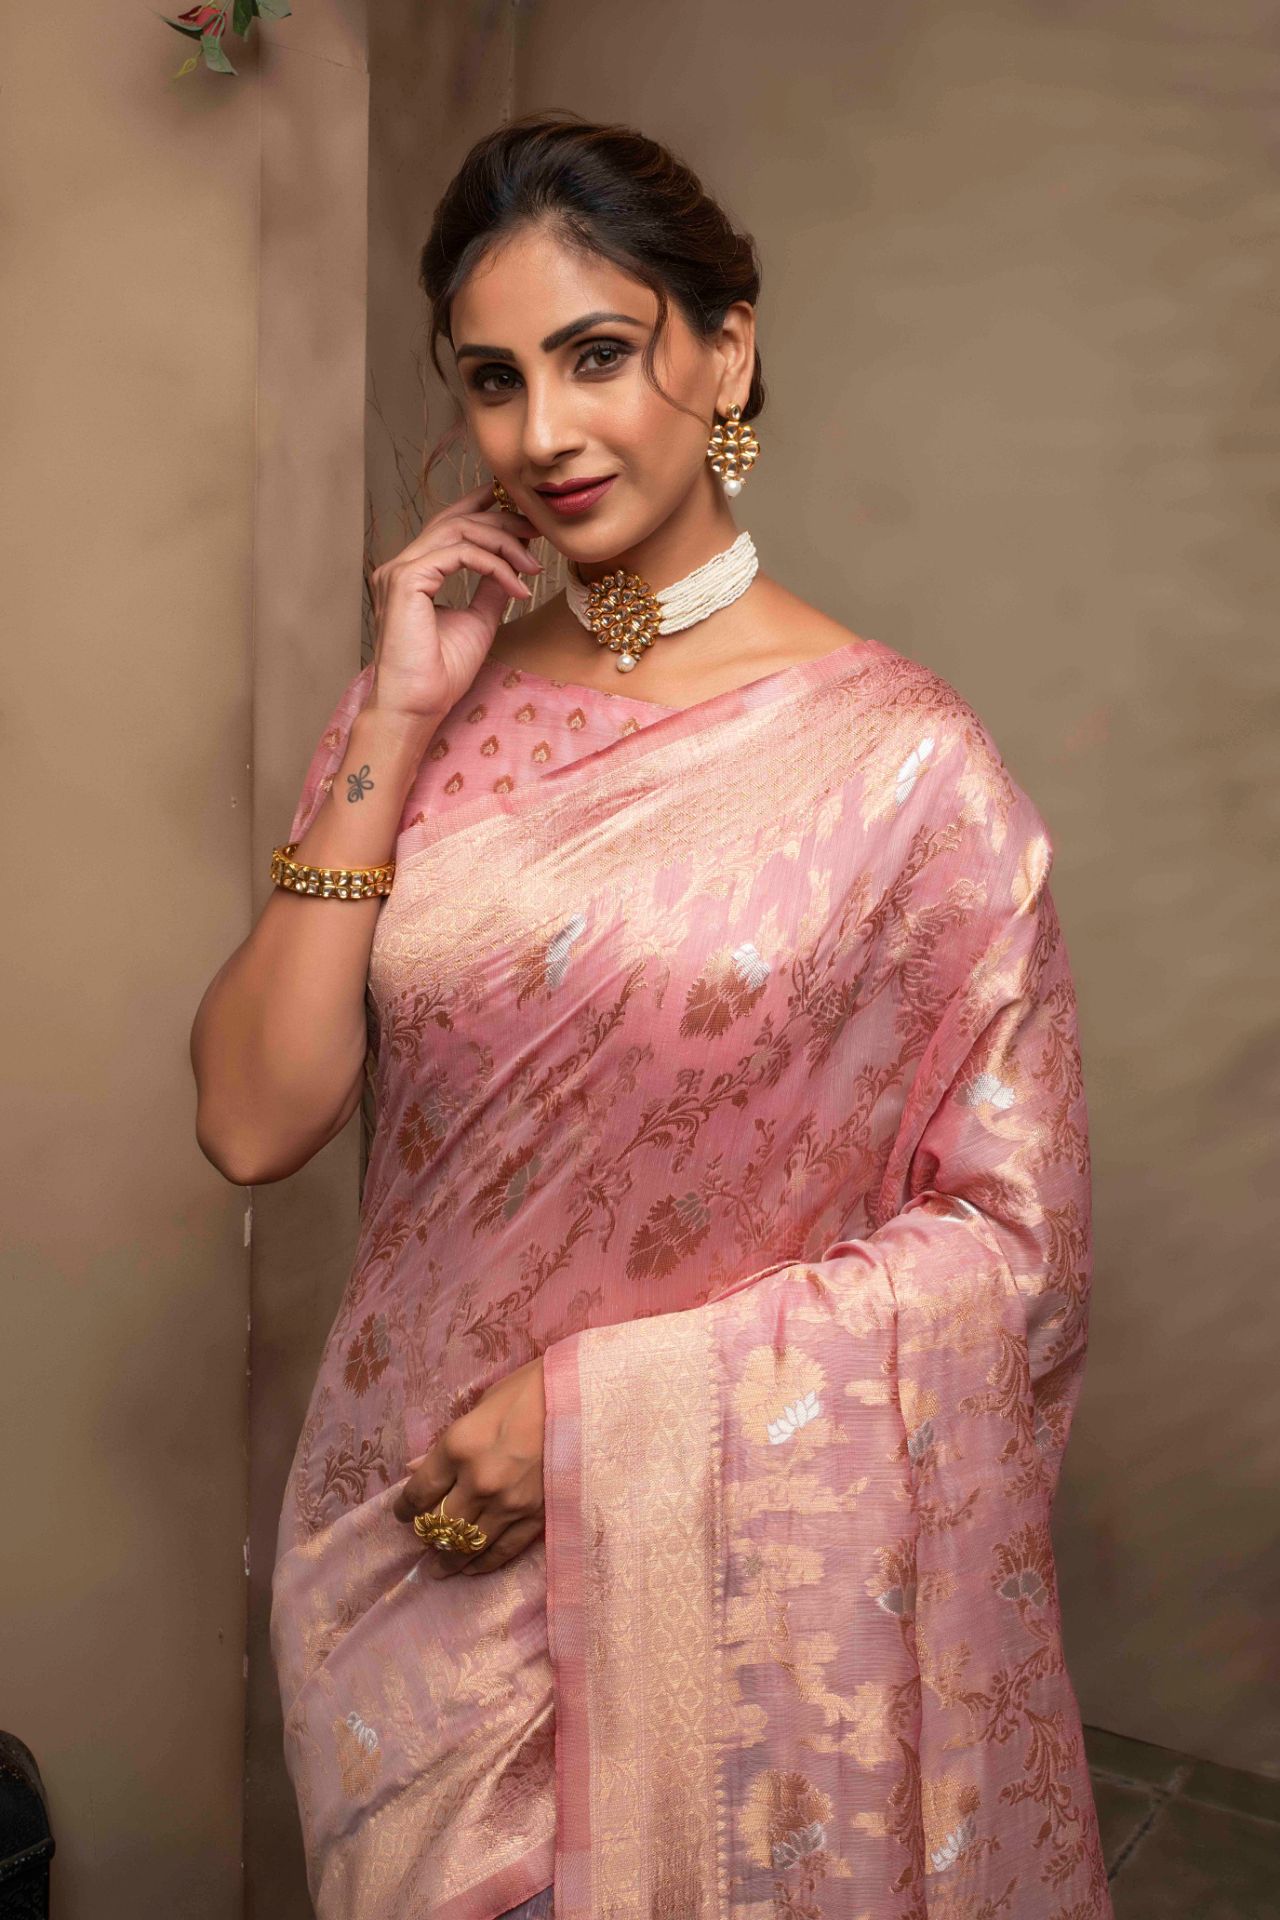 Picture of Pink Span Cotton Jacquard Woven Saree with Blouse